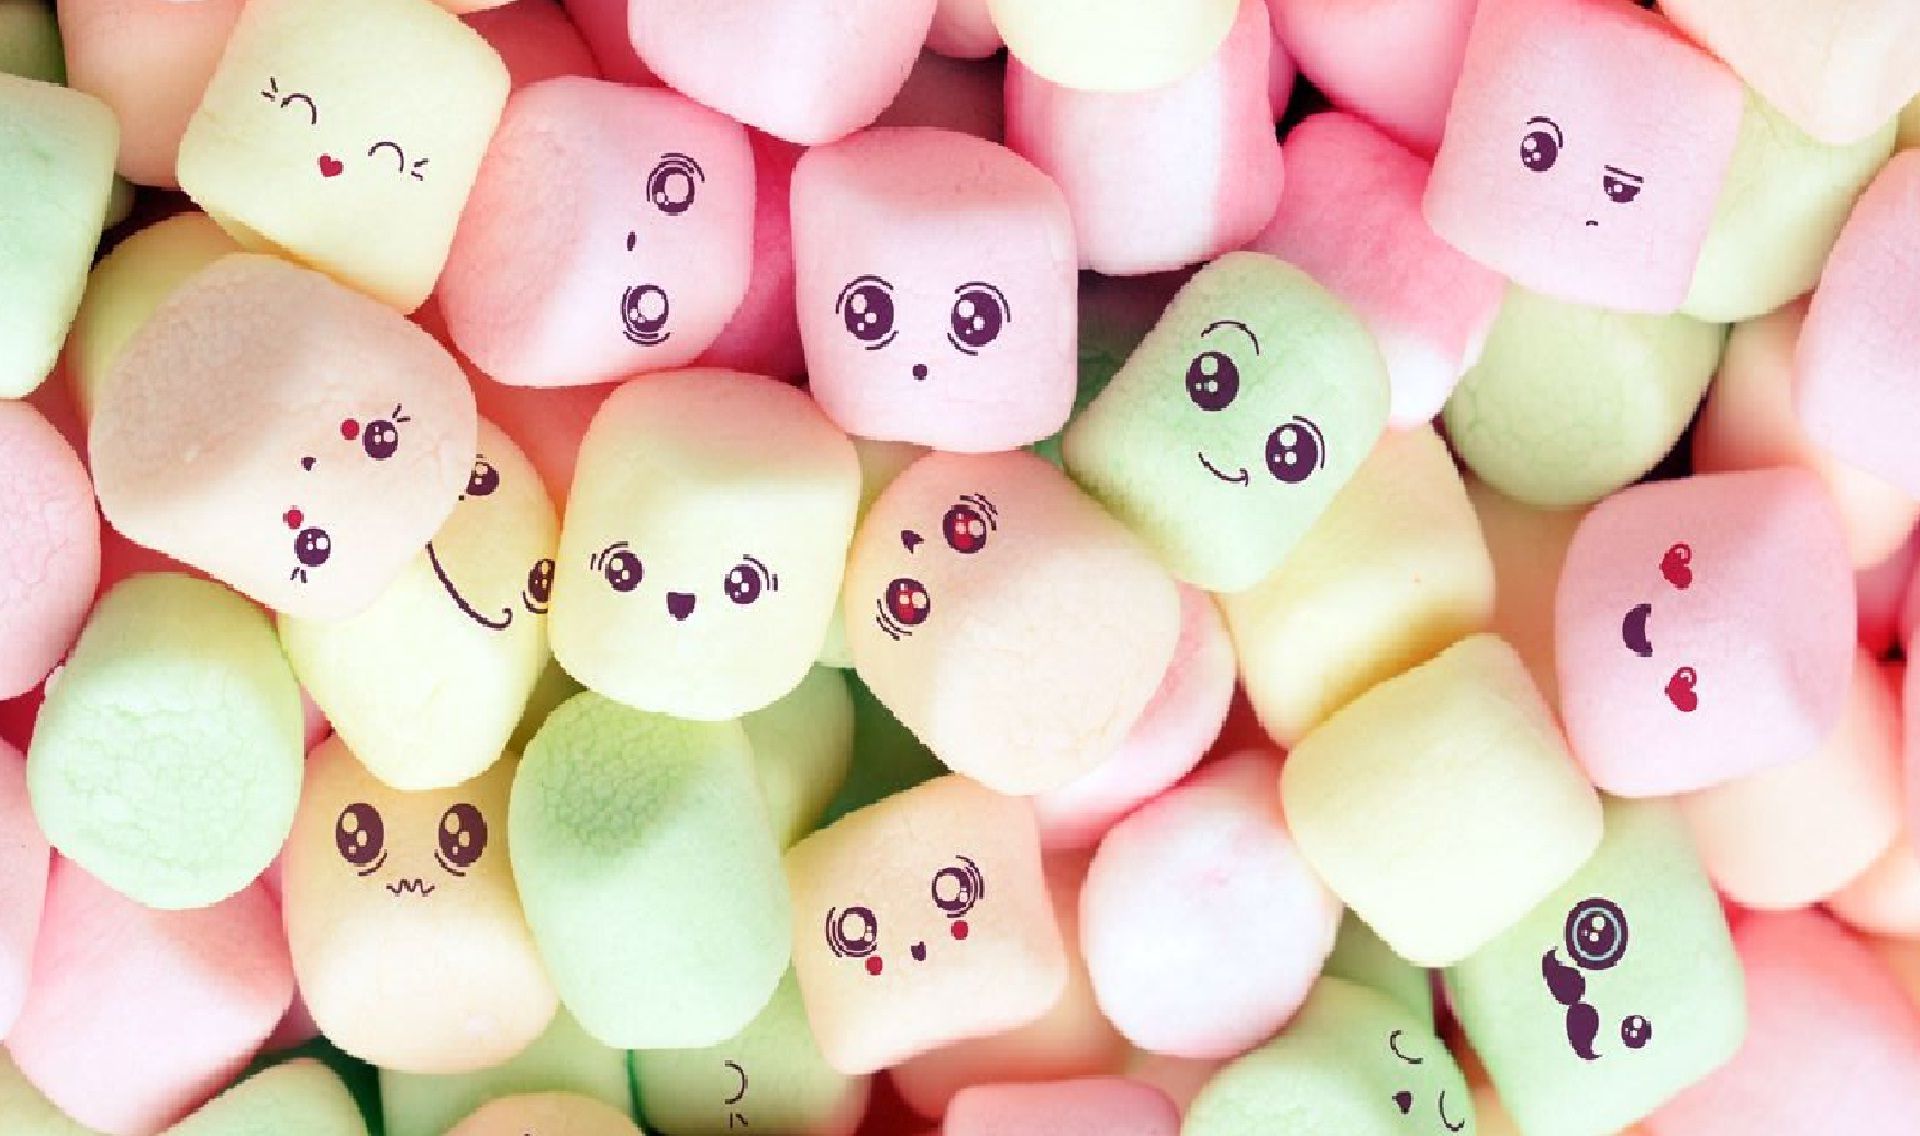 Colorful Marshmallow Wallpapers